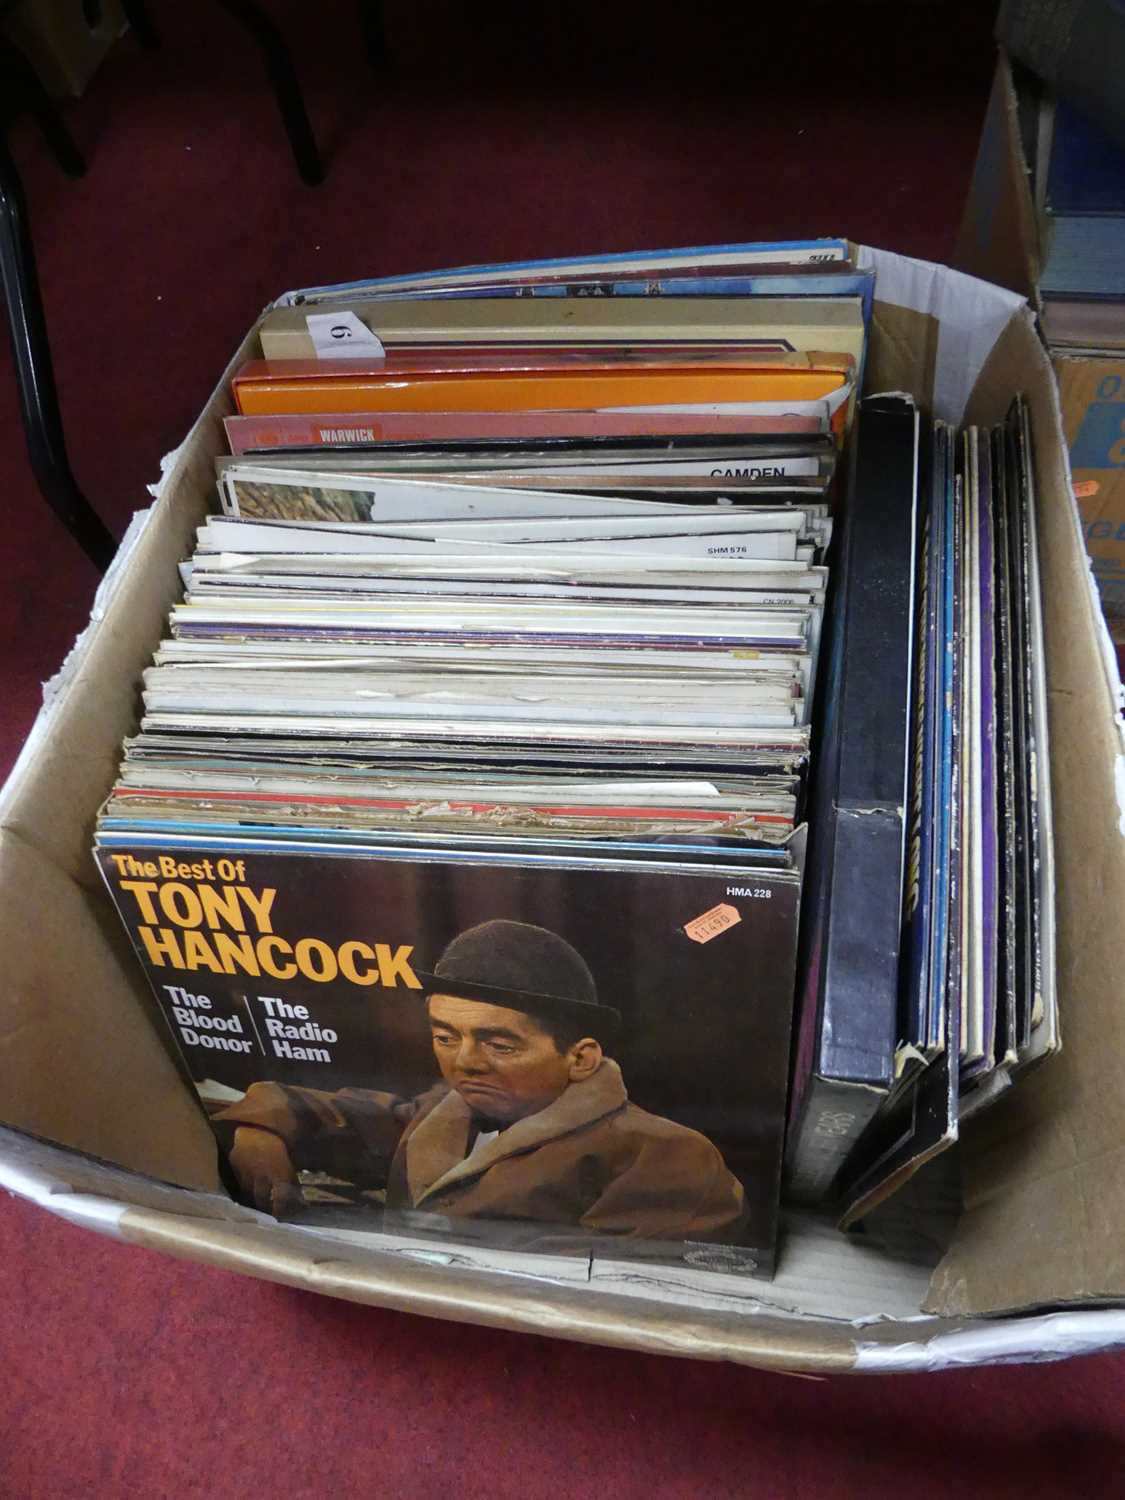 A collection of vintage LPs to include Tony Hancock, Ray Martin, and Glenn Miller